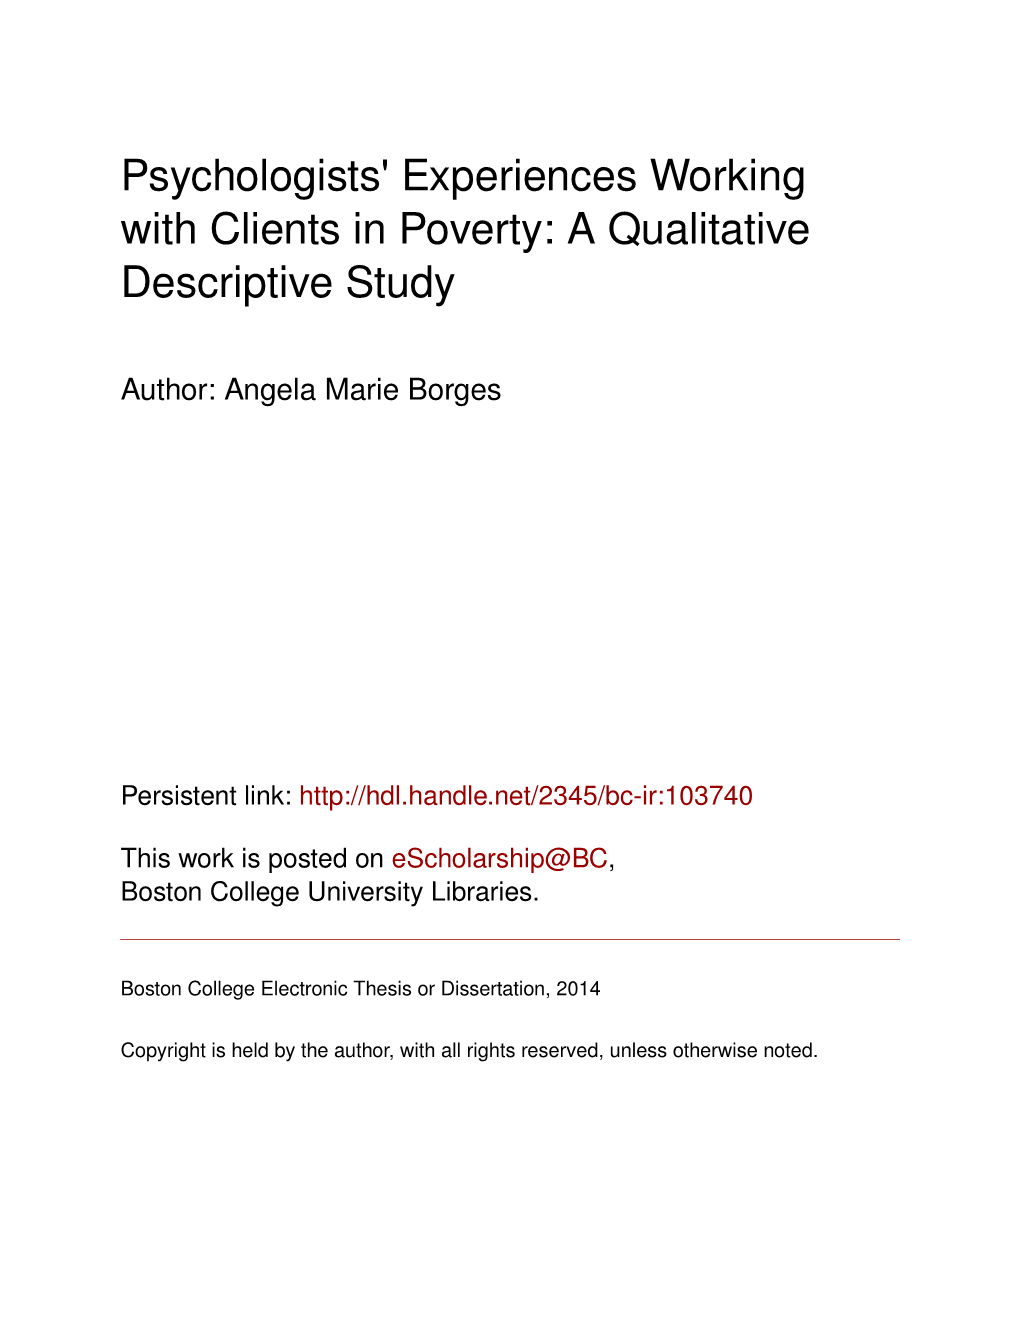 Psychologists' Experiences Working with Clients in Poverty: a Qualitative Descriptive Study